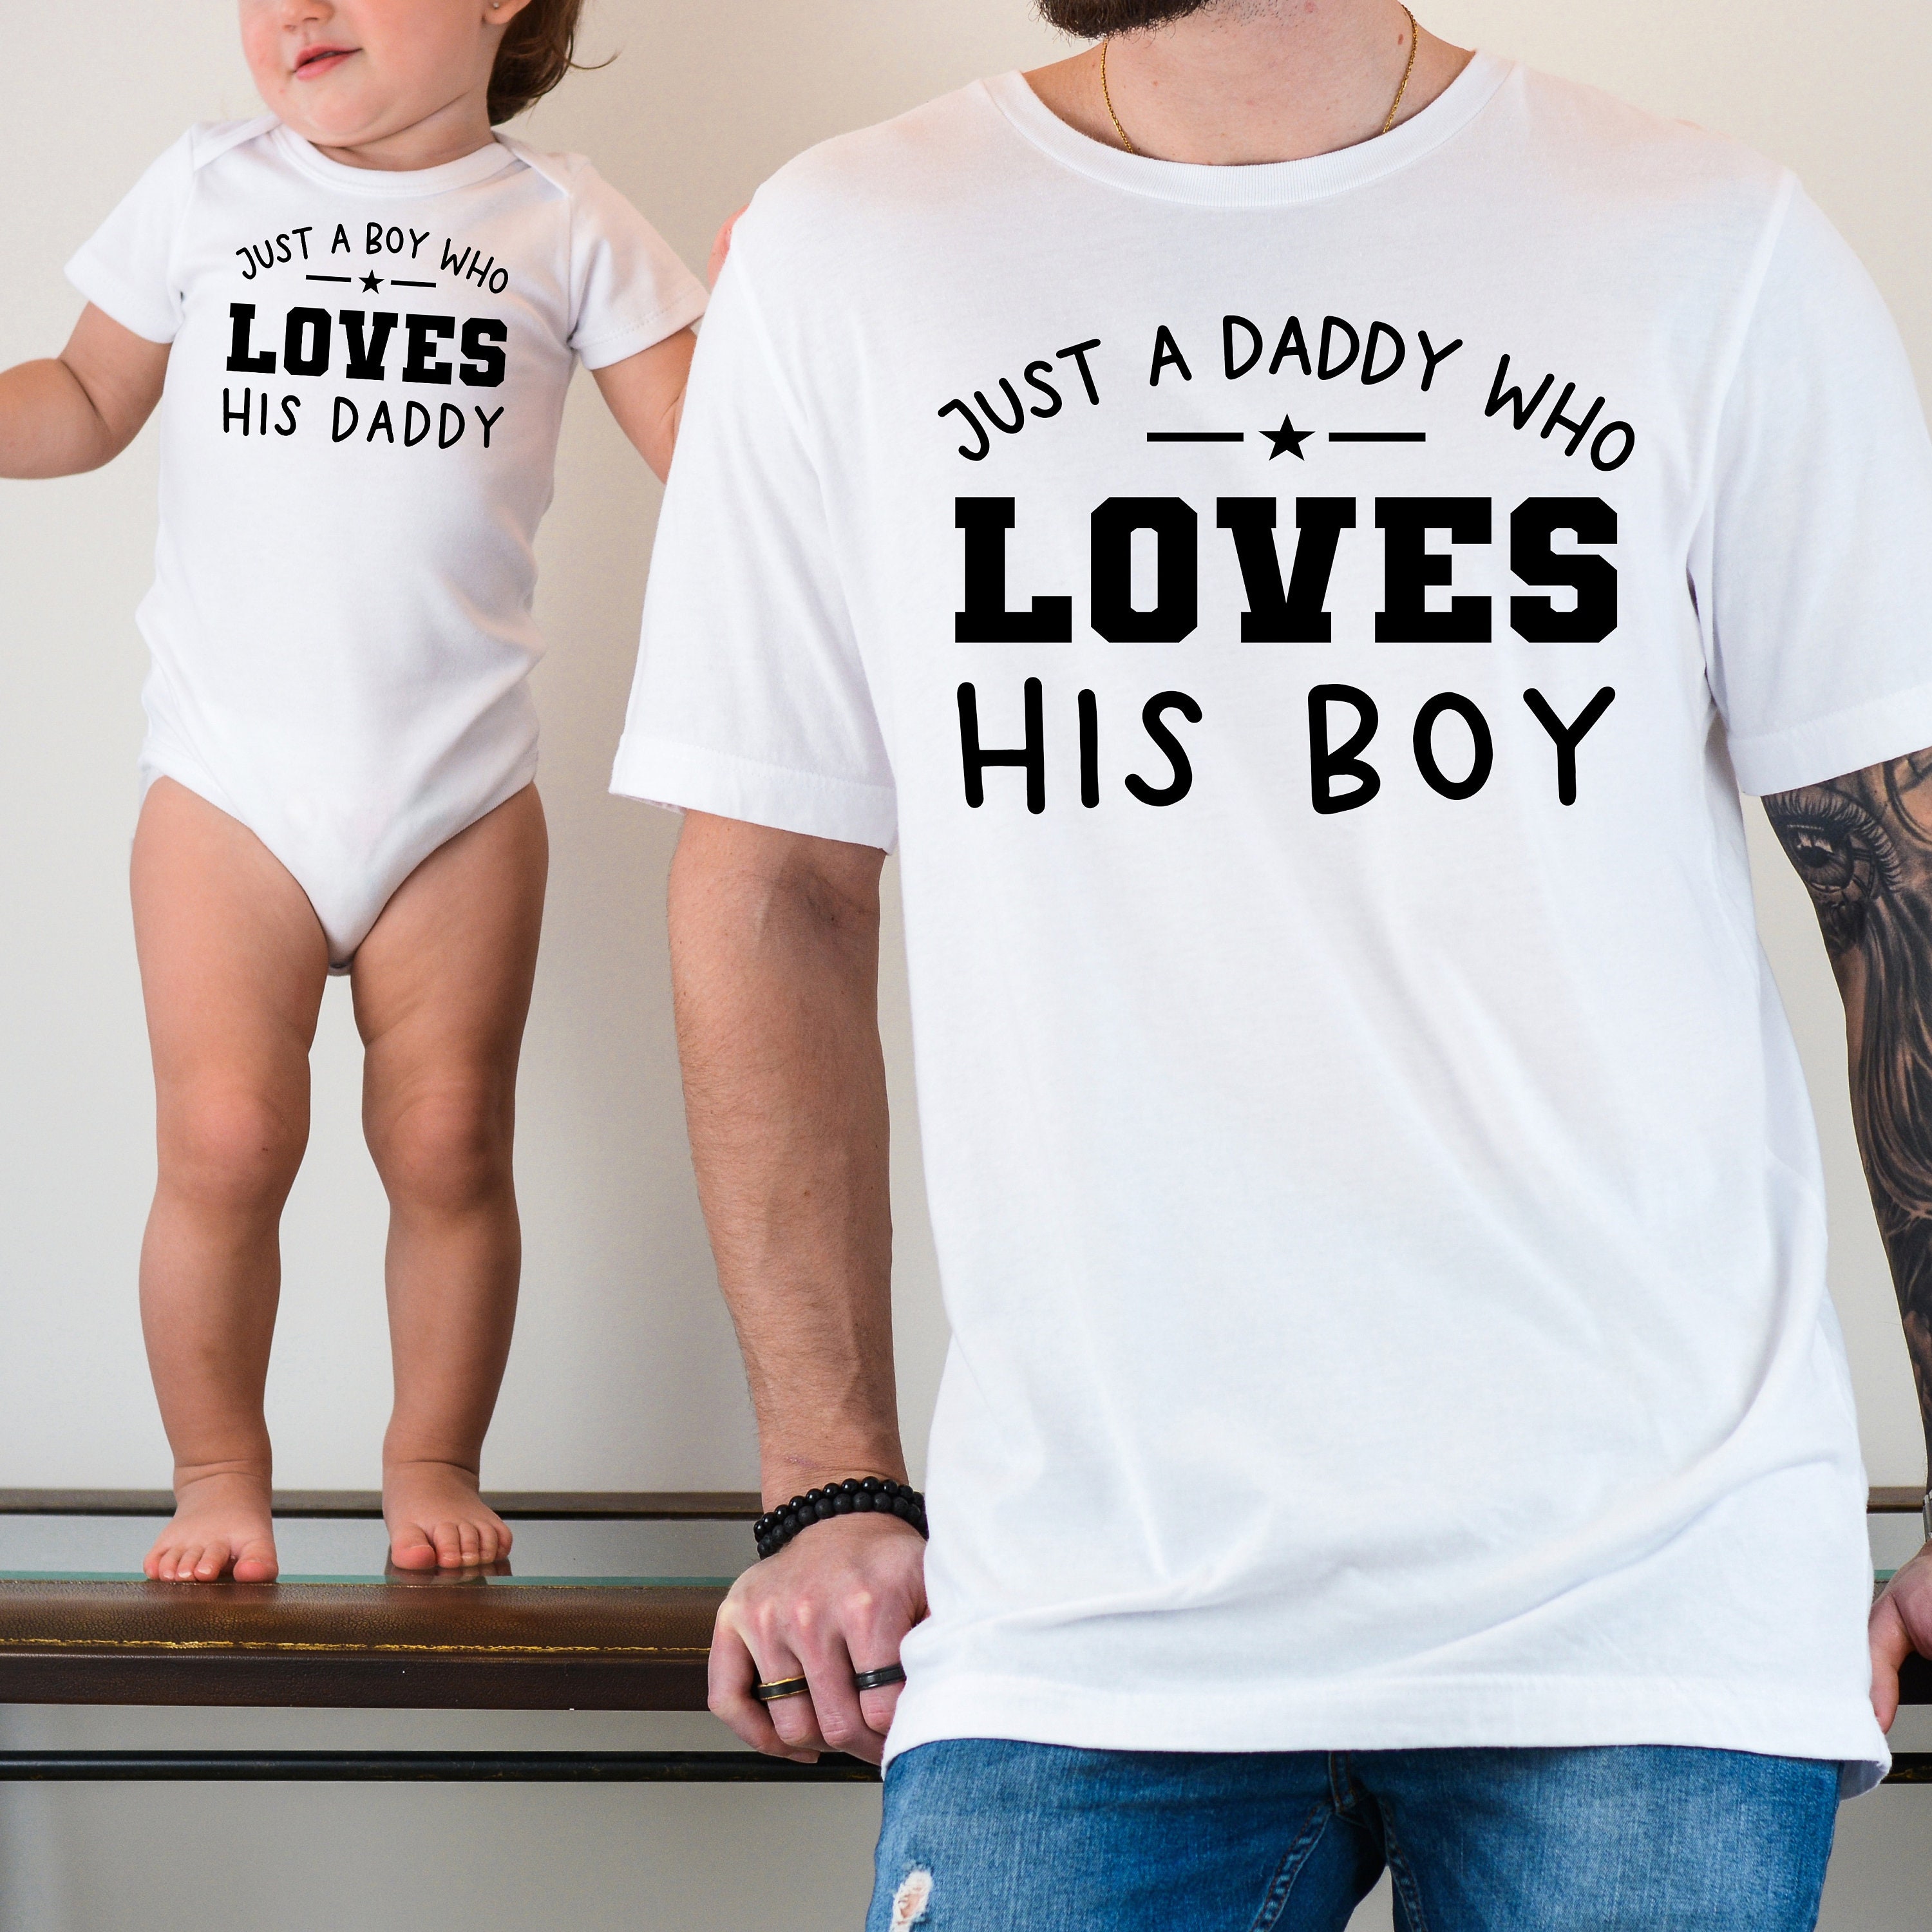 Dad Gift From Son Fishing, Father Son Matching Shirts, Daddy and Me Outfits  Fathers Day Gift From Son Birthday Gift for Dad Reel Cool Dad 